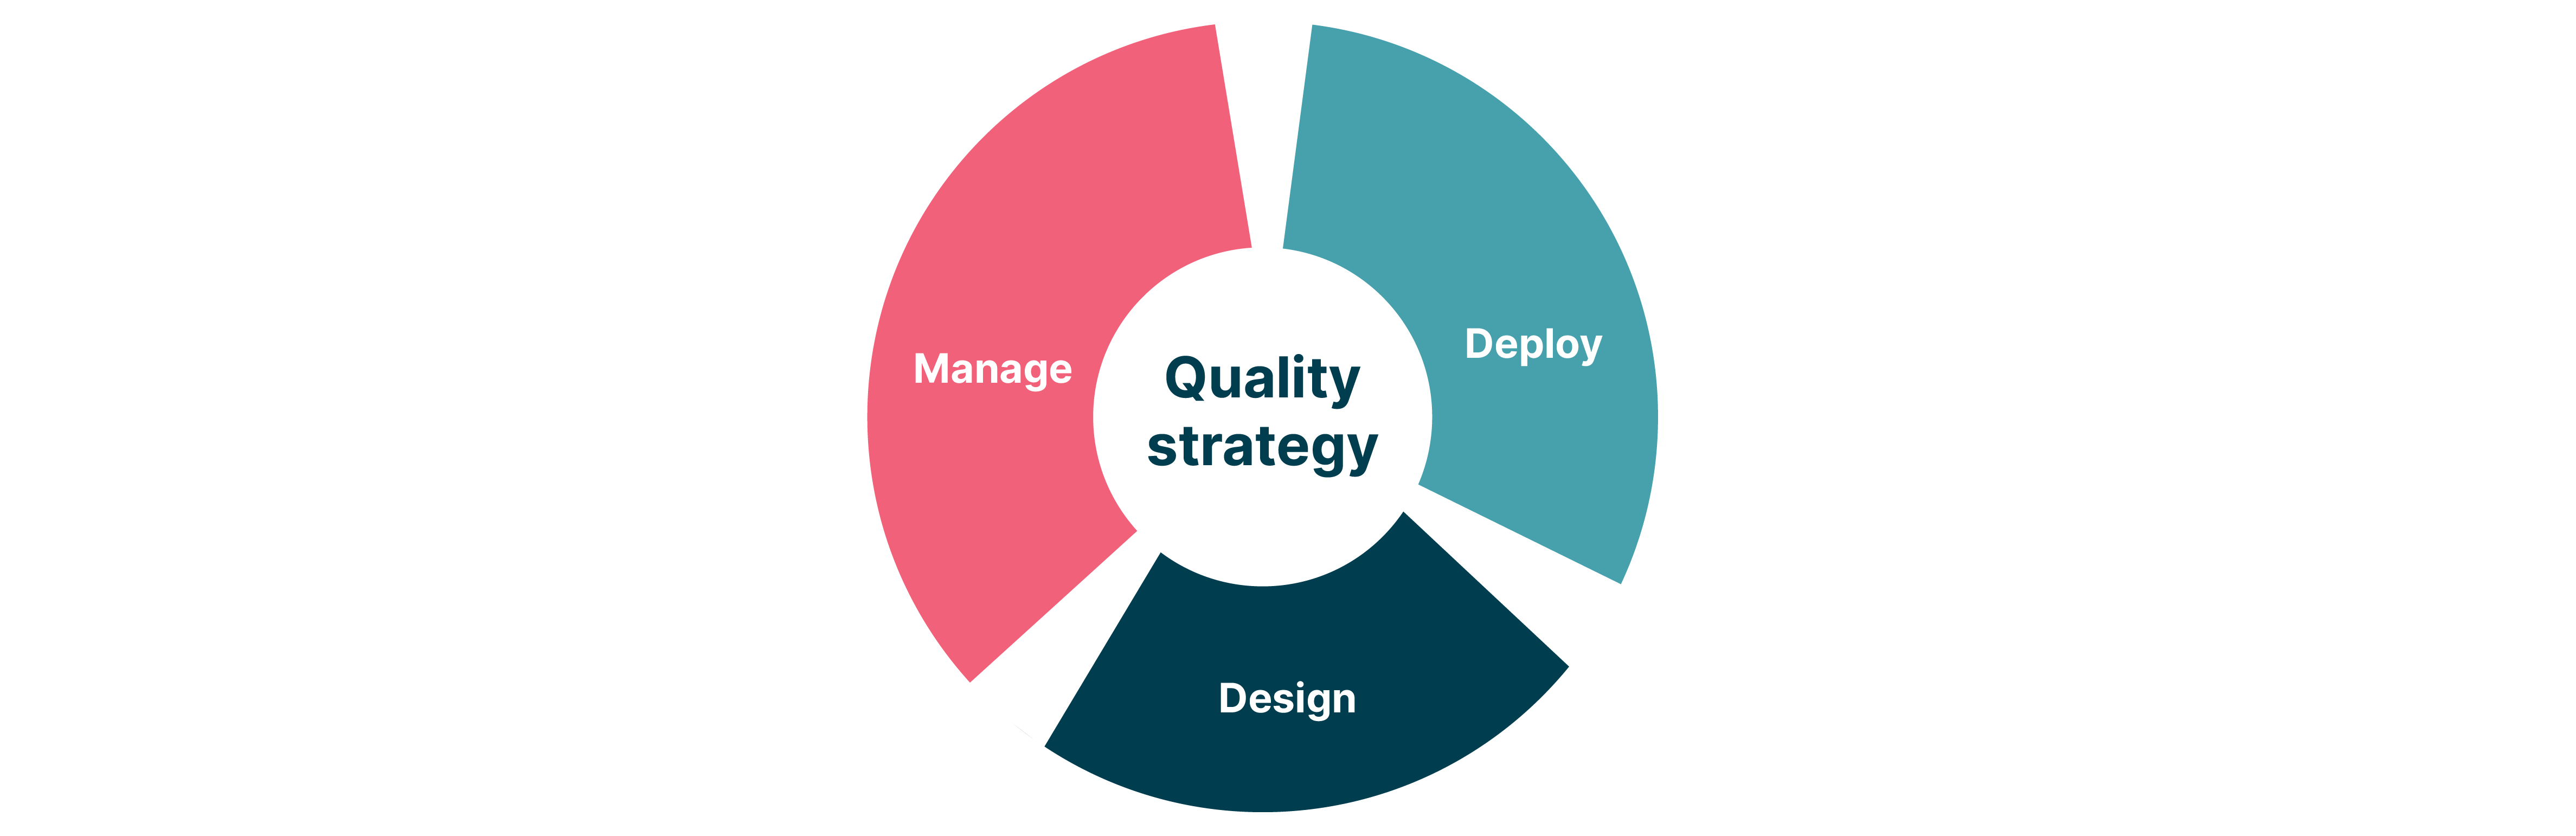 A quality strategy depicted as three phases: manage, design and deploy